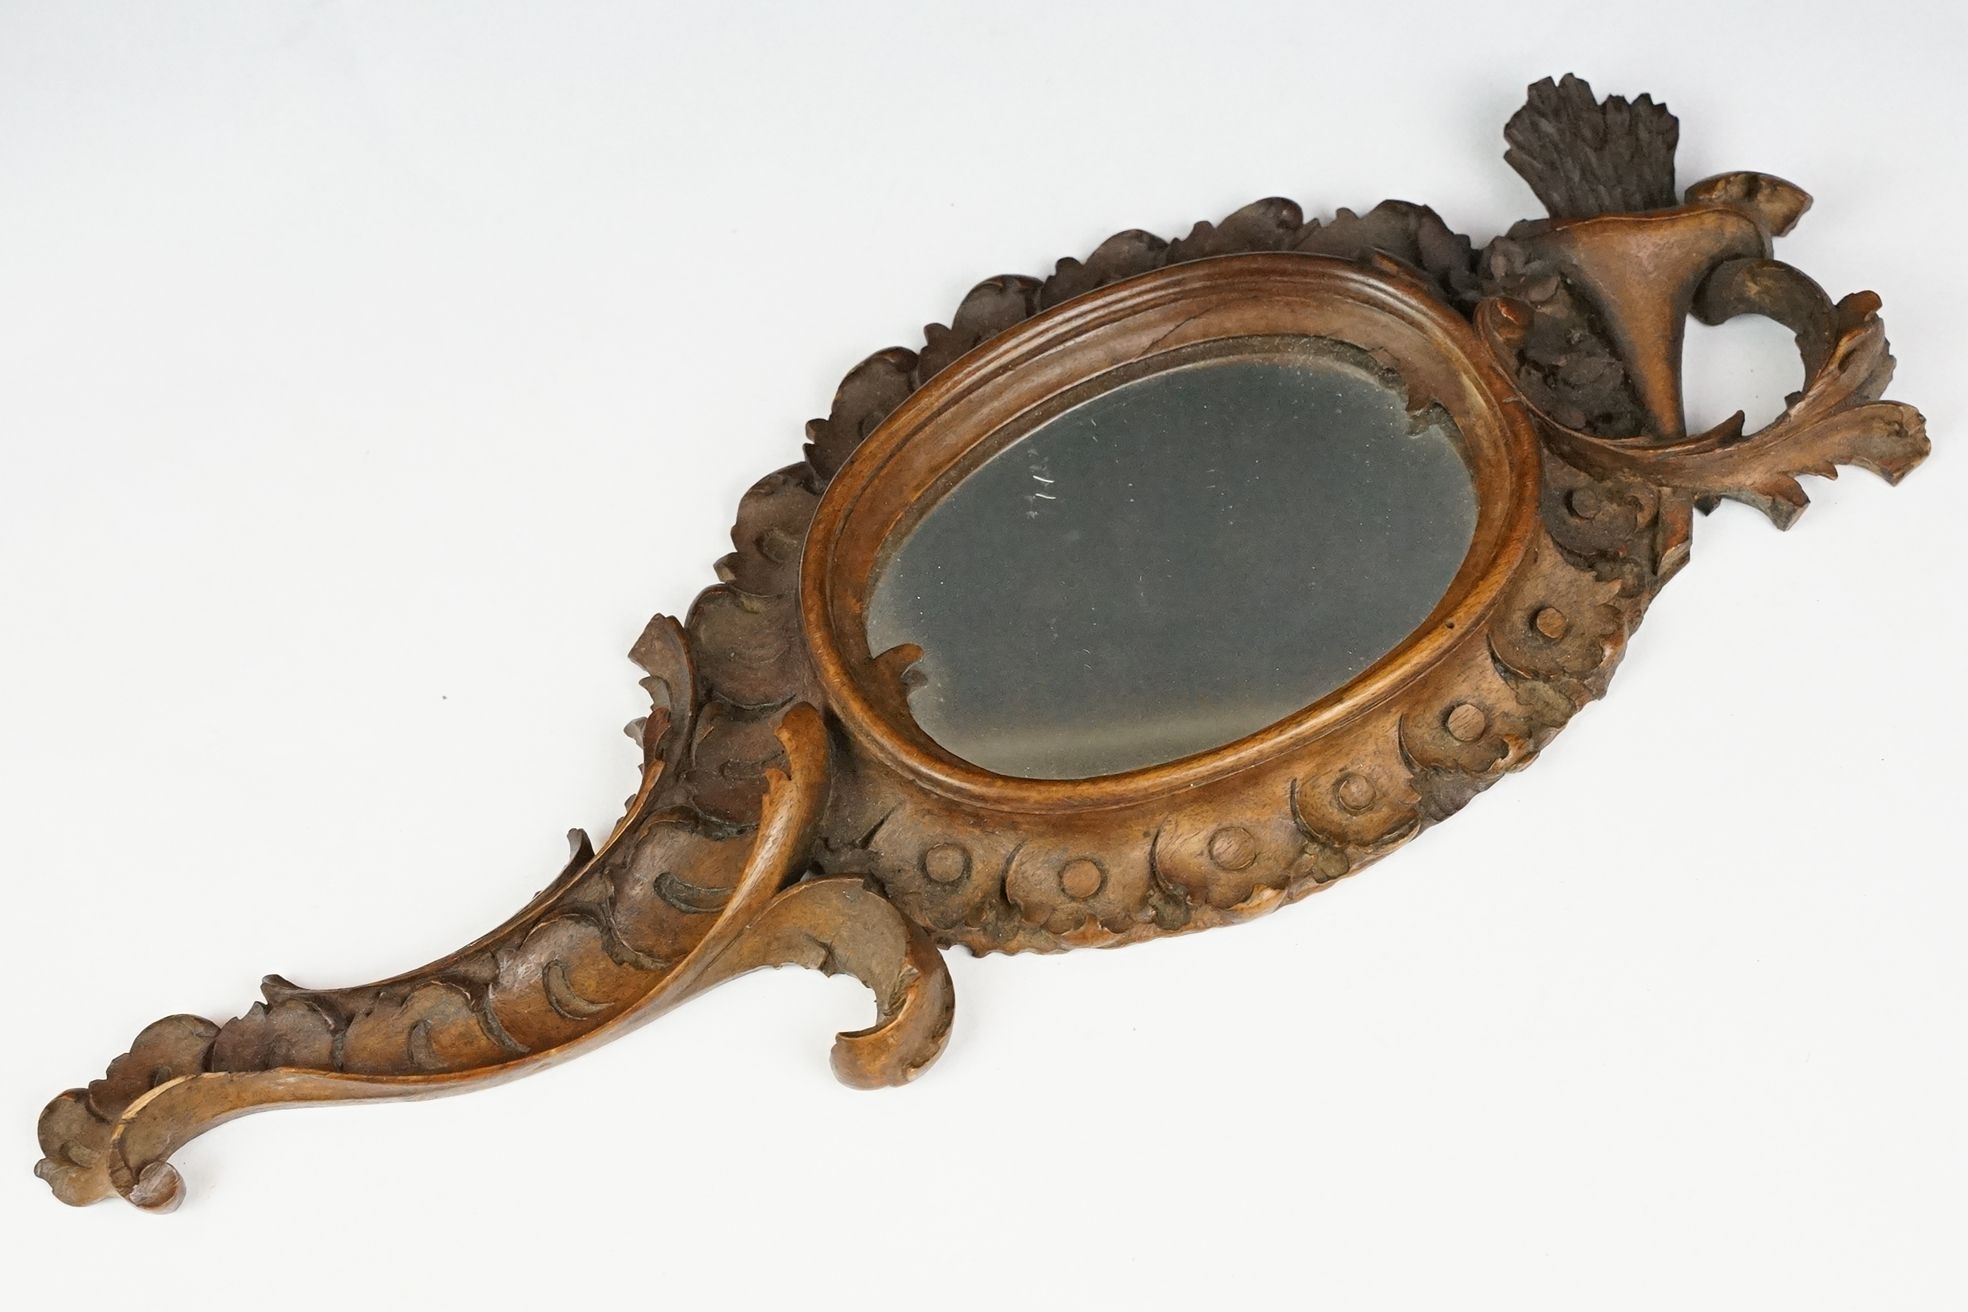 An antique carved wooden Black Forest hand mirror with foliate decoration.